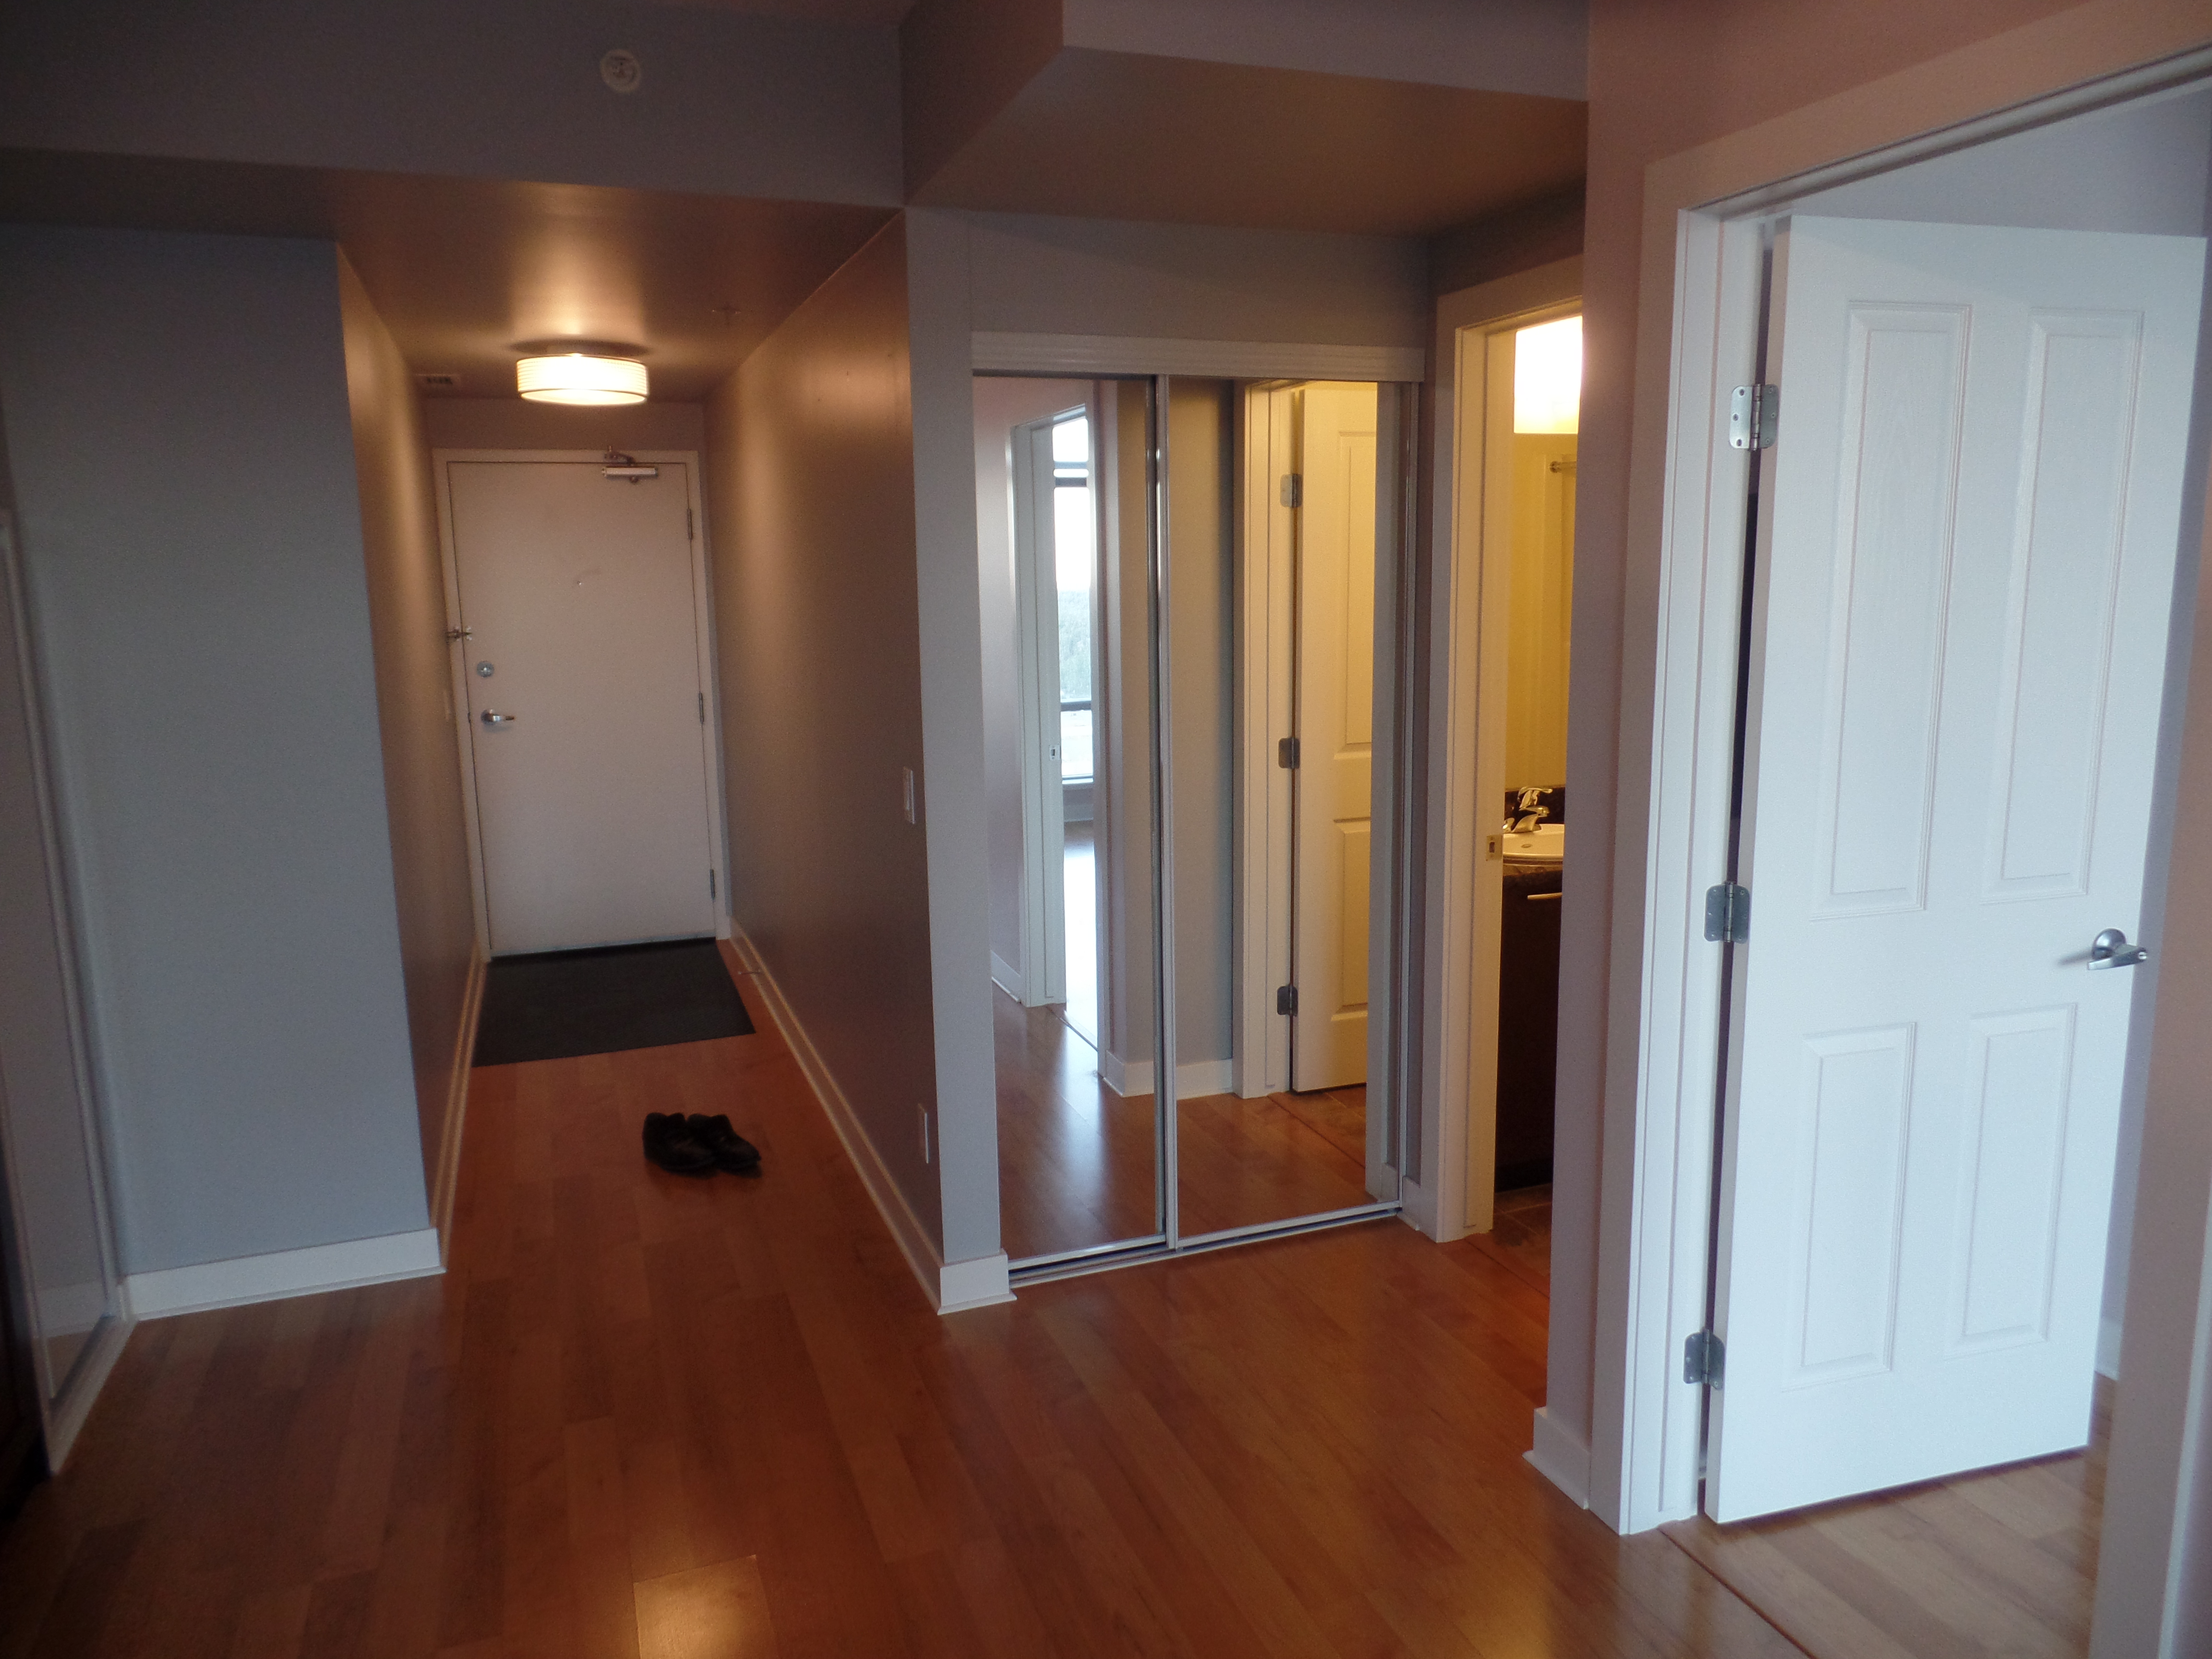 Almost like new1 bdrm apartment for rent in Brentwood, close to U of C!